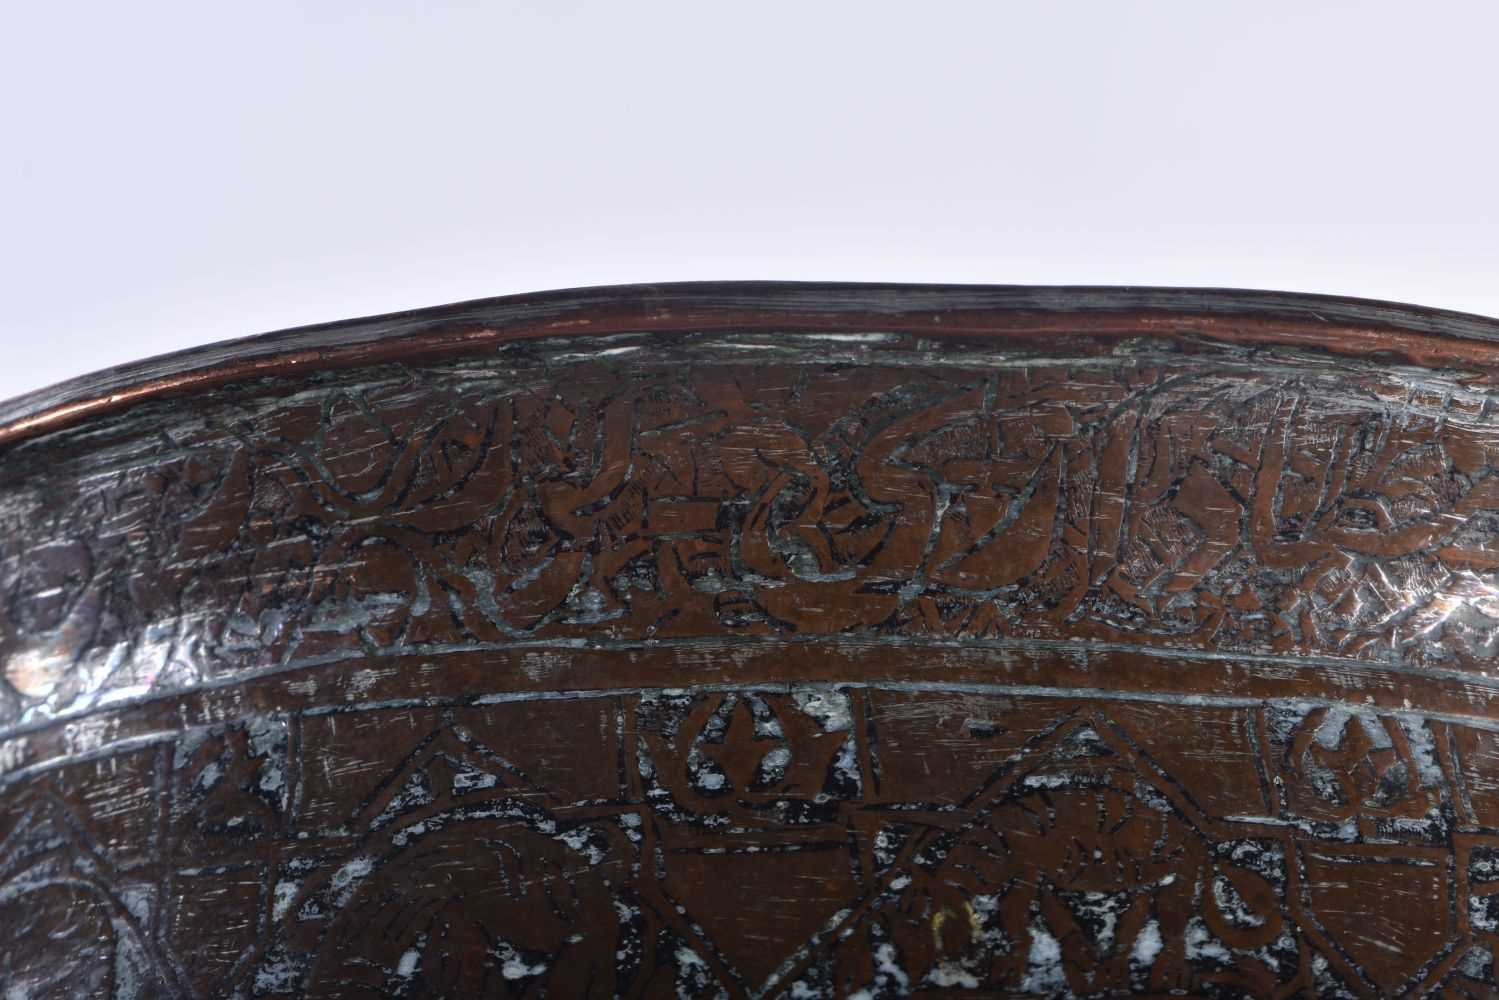 A 16TH/17TH CENTURY PERSIAN ISLAMIC MIDDLE EASTERN BRONZE COPPER ALLOY BOWL AND COVER decorated - Image 7 of 10